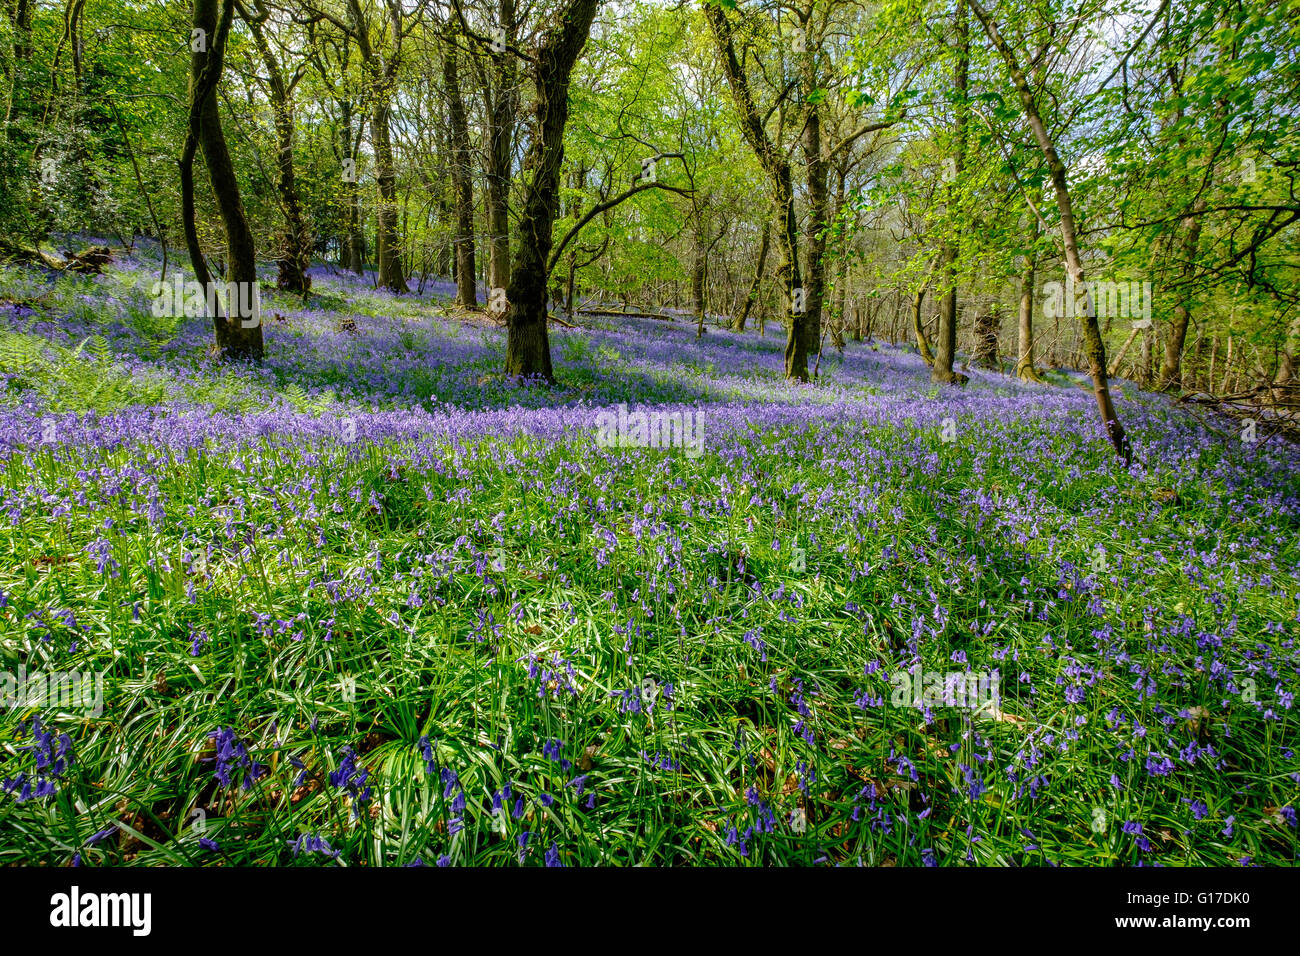 Swathes of English bluebells 'hyacinthoides non-scripta' growing in Forest of Dean above Blakeney Gloucestershire England UK Stock Photo